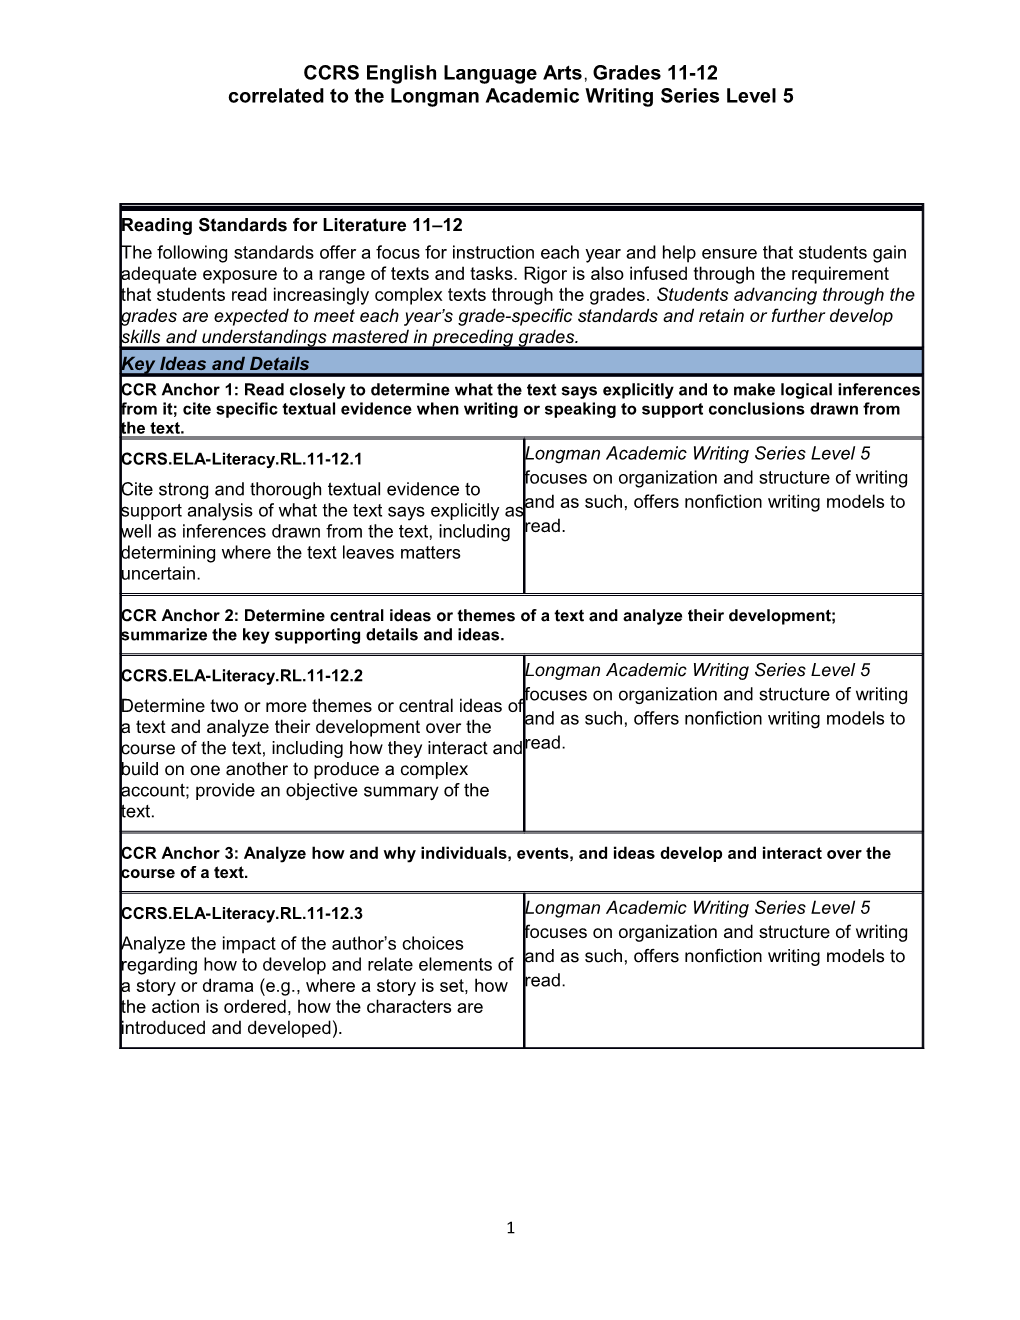 Reading Standards for Literature 9 10